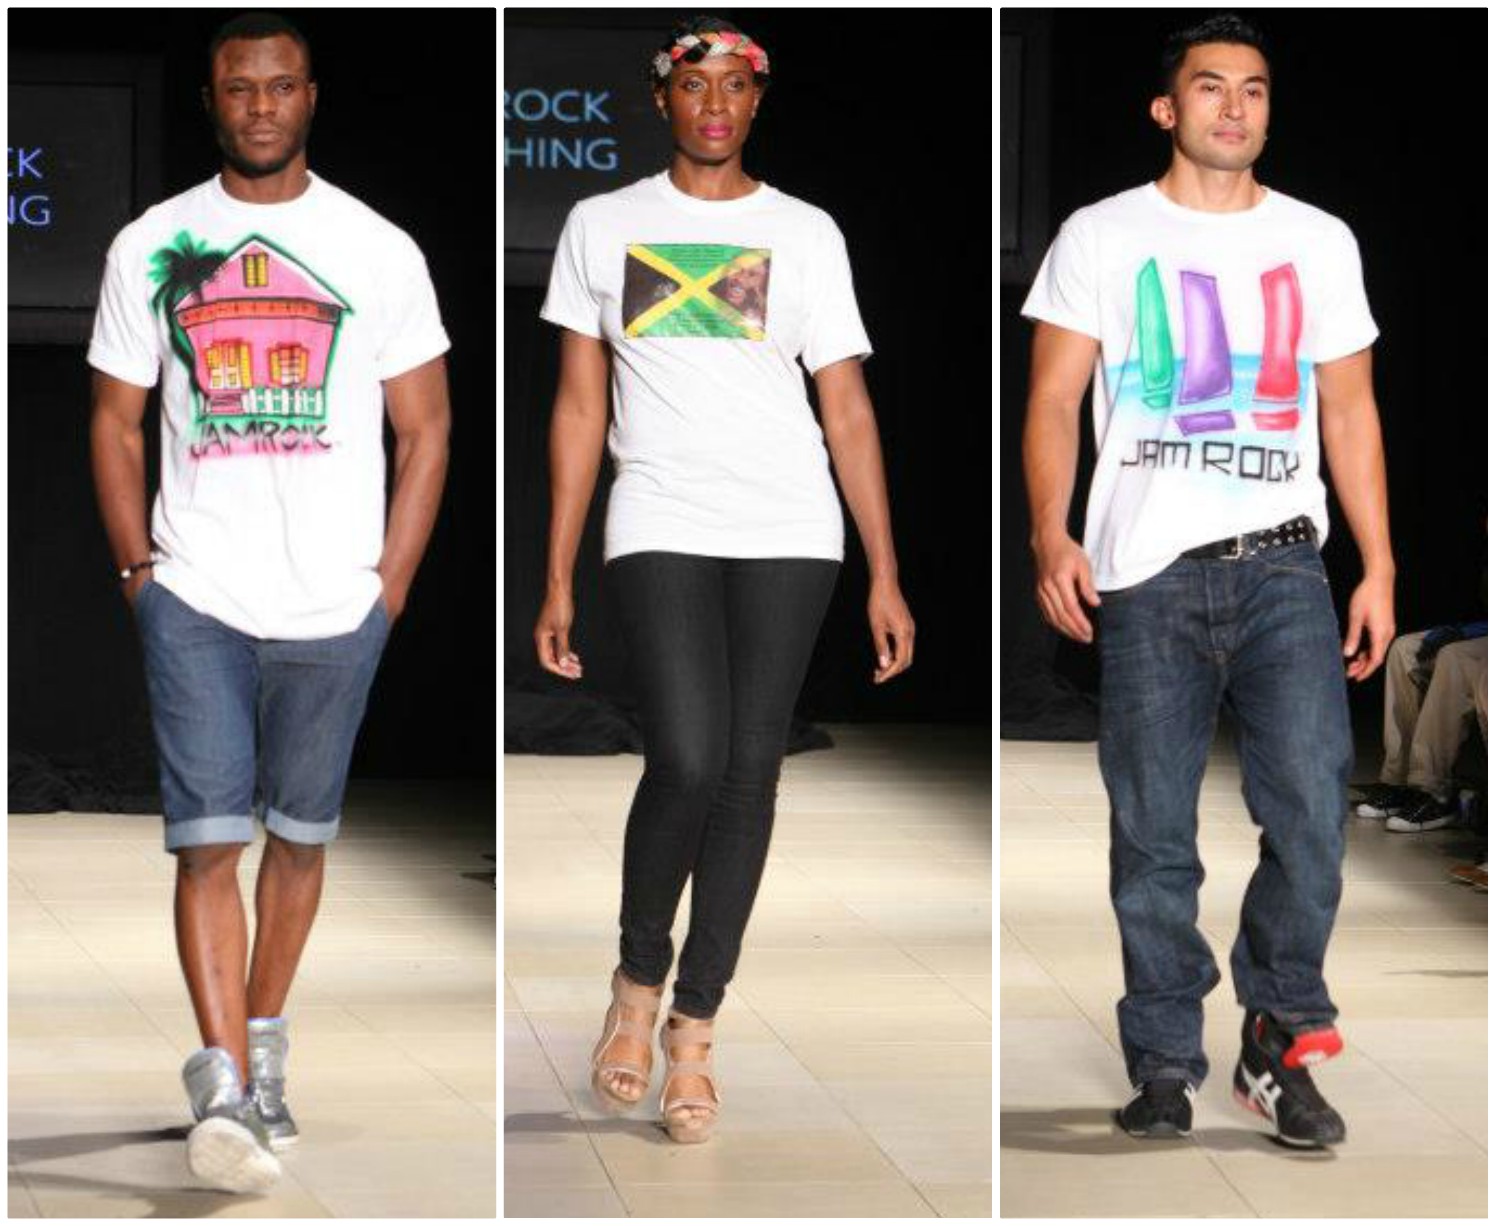 jamrock-clothing-brand-pays-tribute-to-jamaican-culture